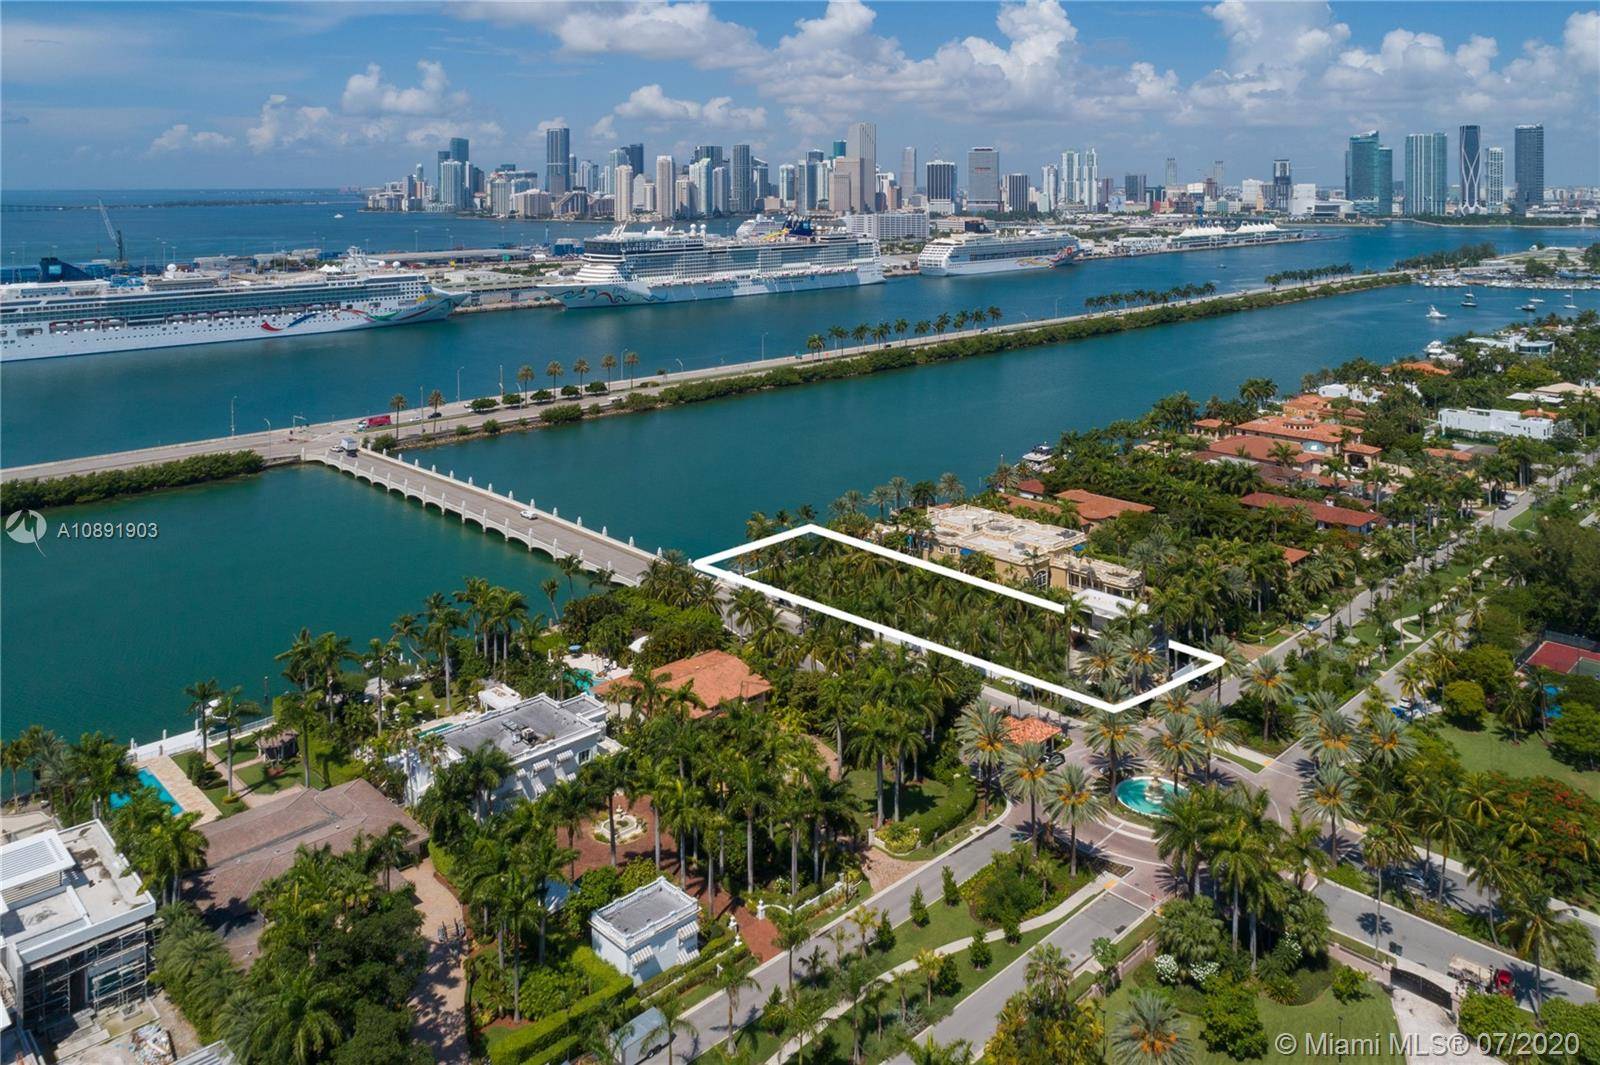 Your dream home on this 30, 000 SF waterfront lot in one of those most coveted gated communities.